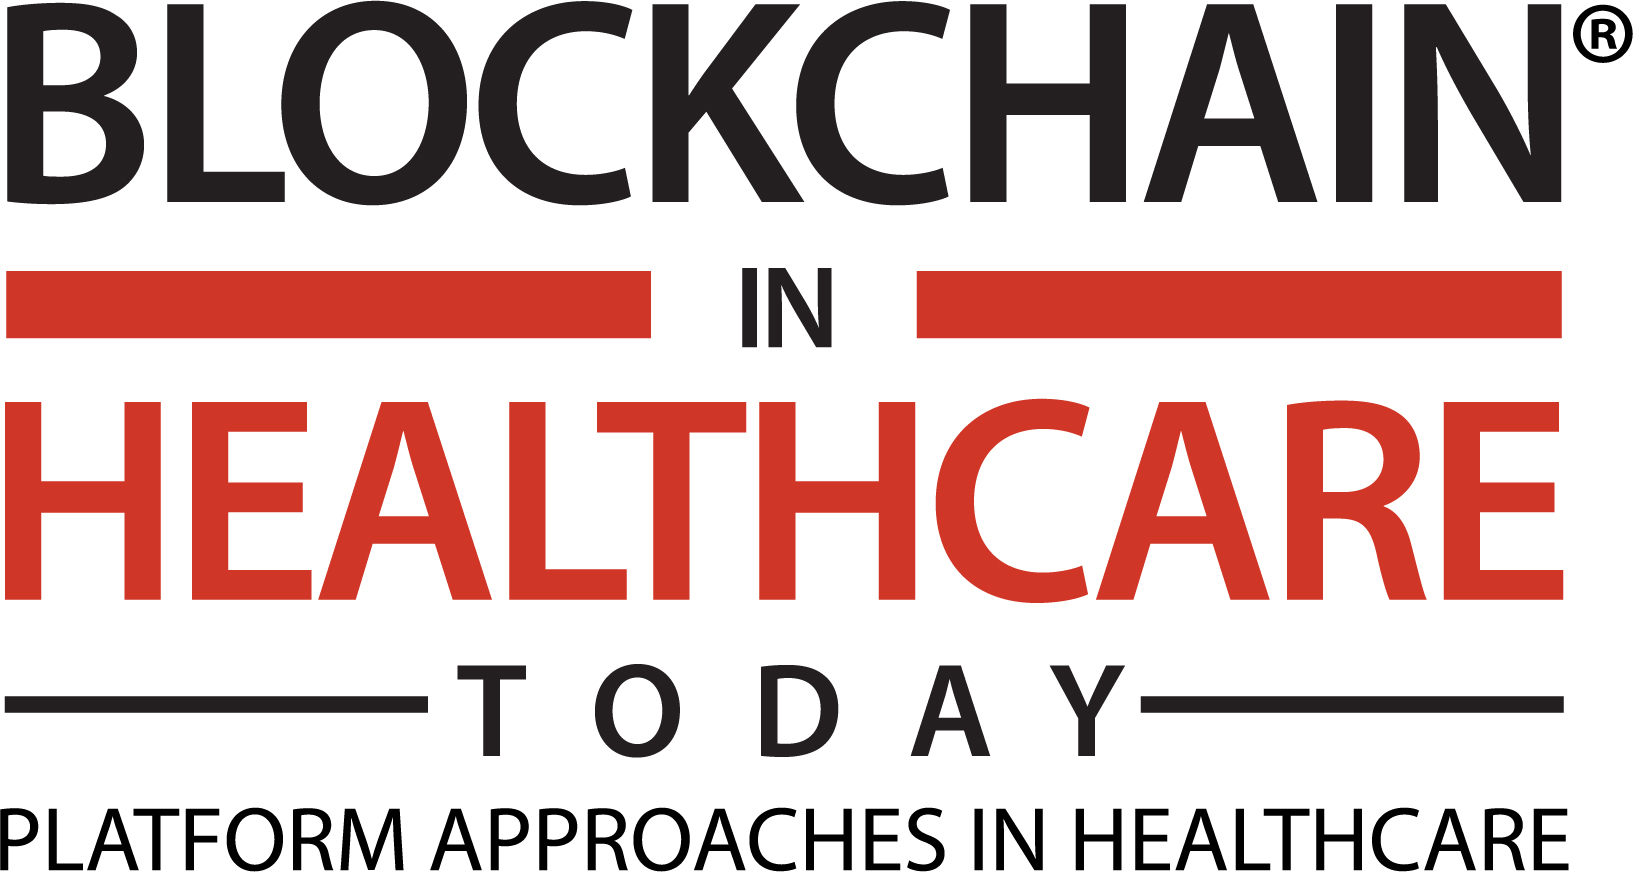 Blockchain in Healthcare Today (BHTY) is the leading international open access peer reviewed journal that amplifies and disseminates platform approaches in healthcare and distributed ledger technology research and innovations.